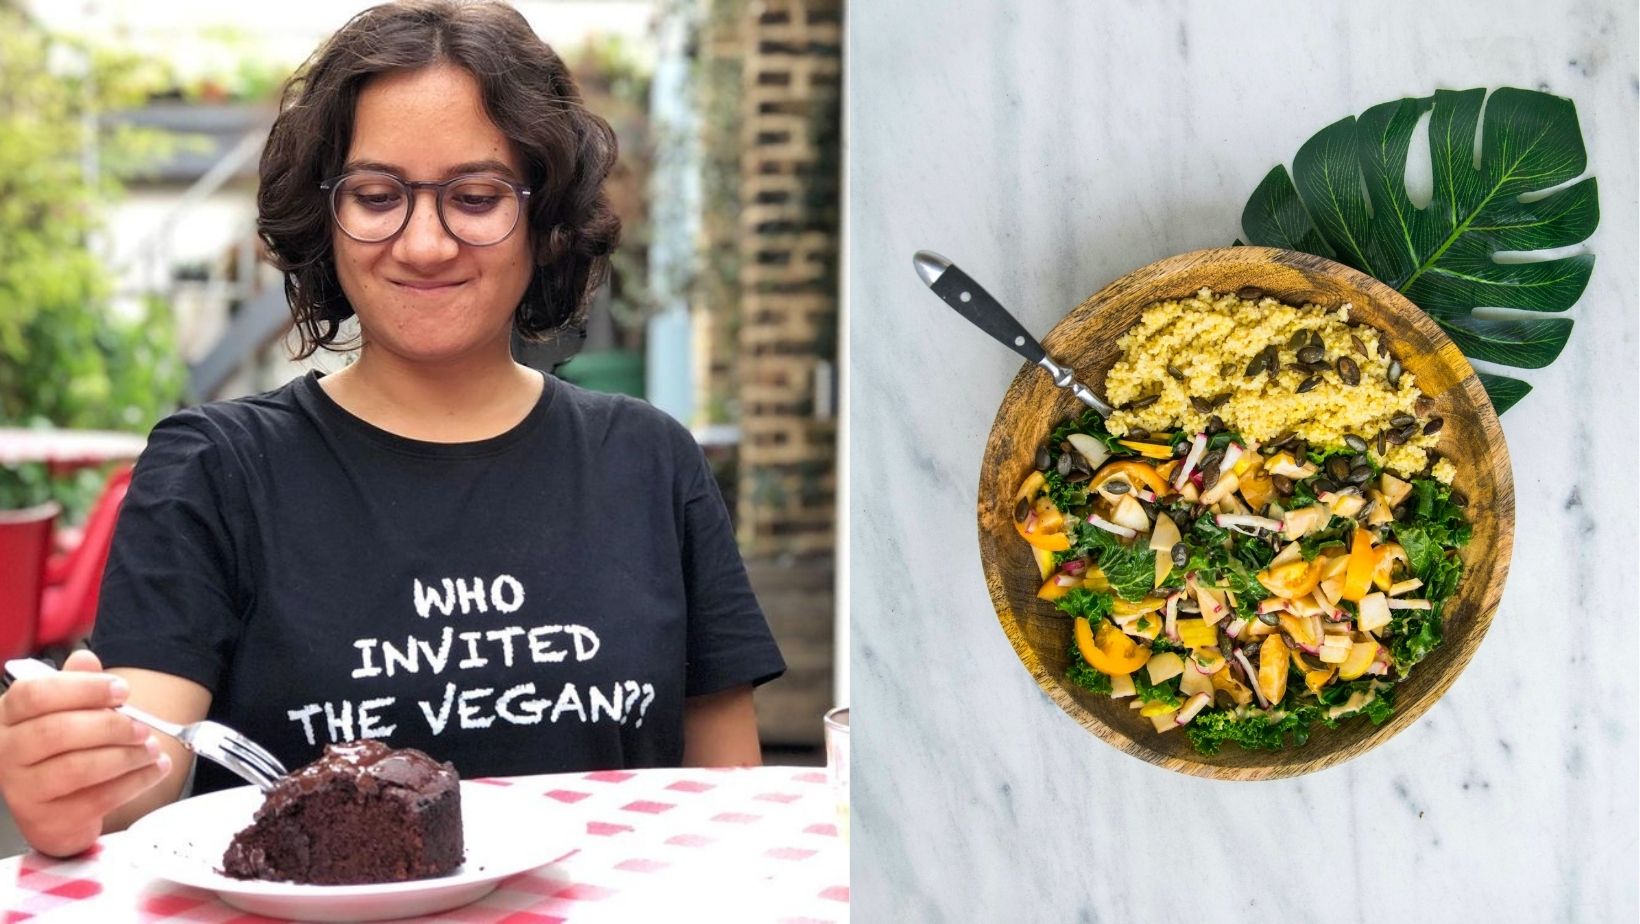 Vegan:Sustainability Experts Share 10 Simple Things You Can Do Right Now To Protect The Earth